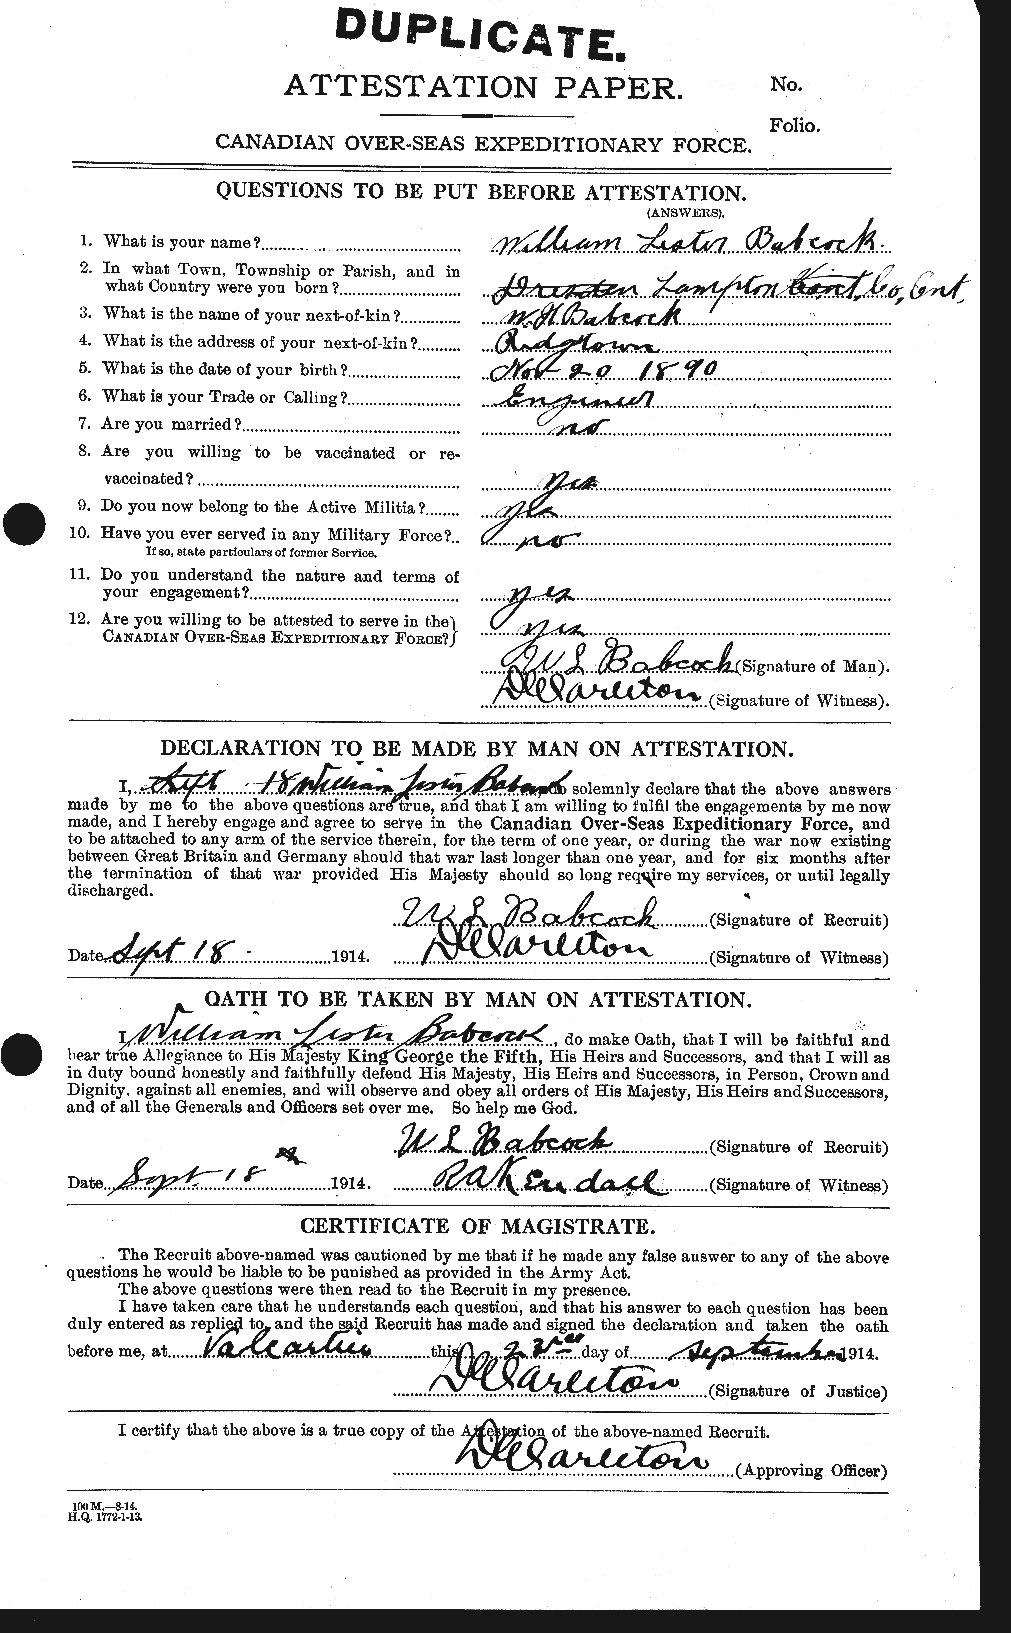 Personnel Records of the First World War - CEF 218185a